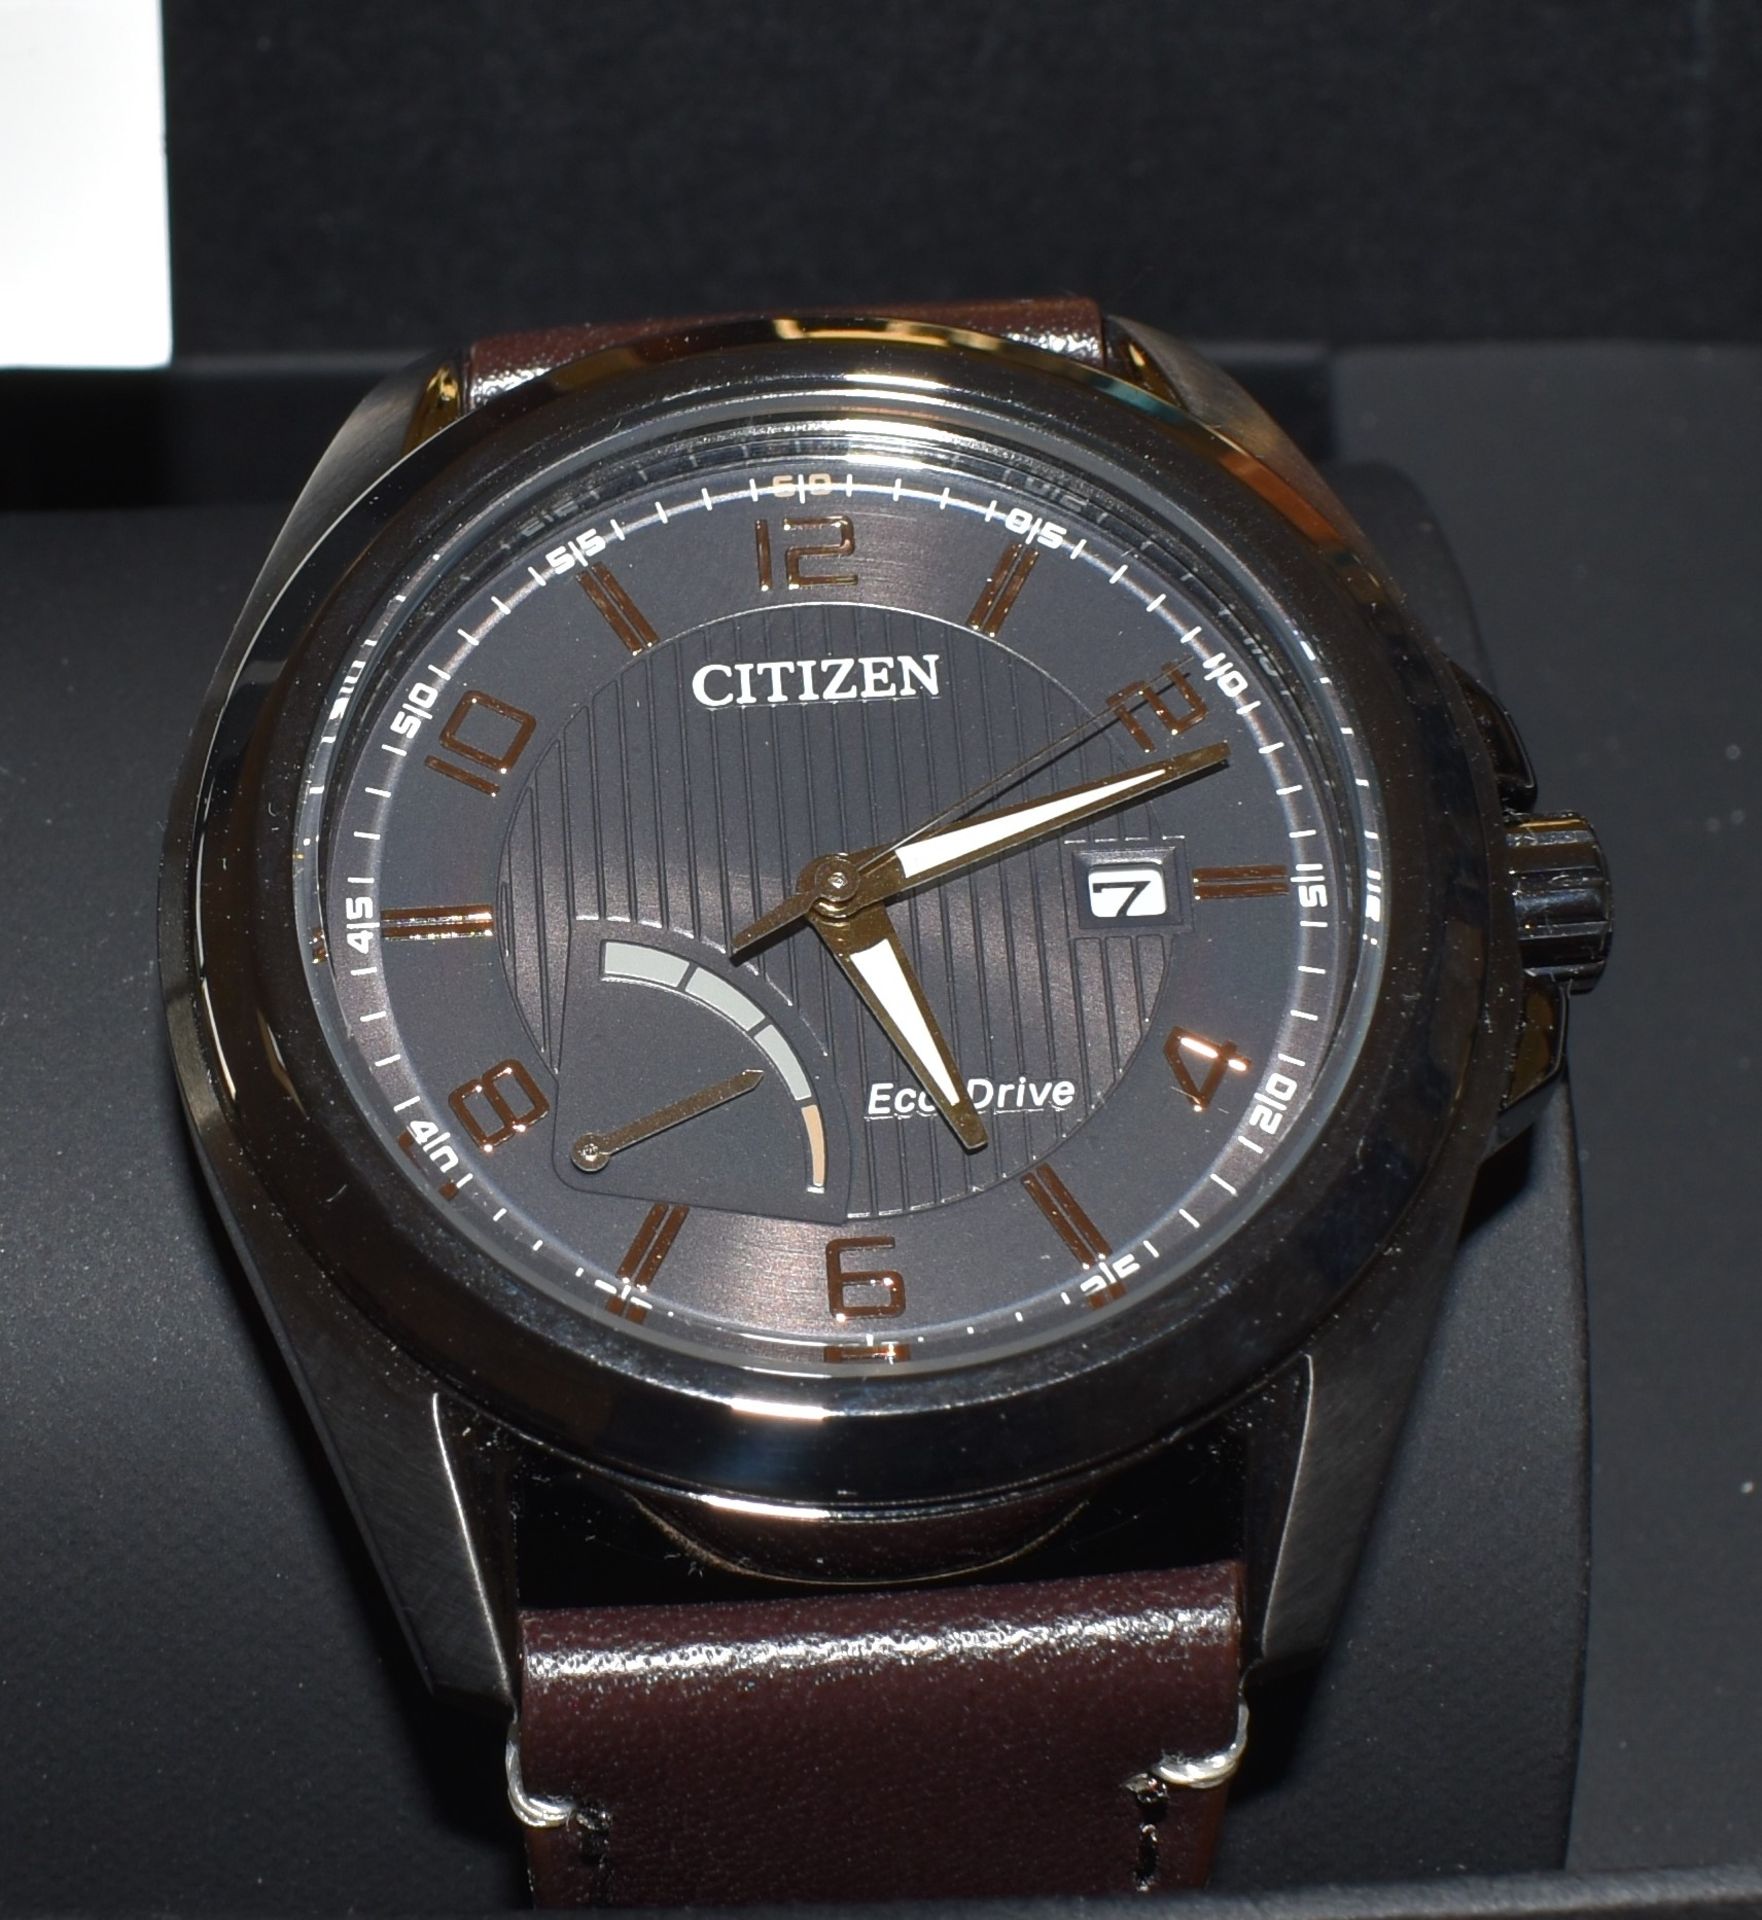 Citizen Men's Watch AW7057-18H - Image 2 of 3